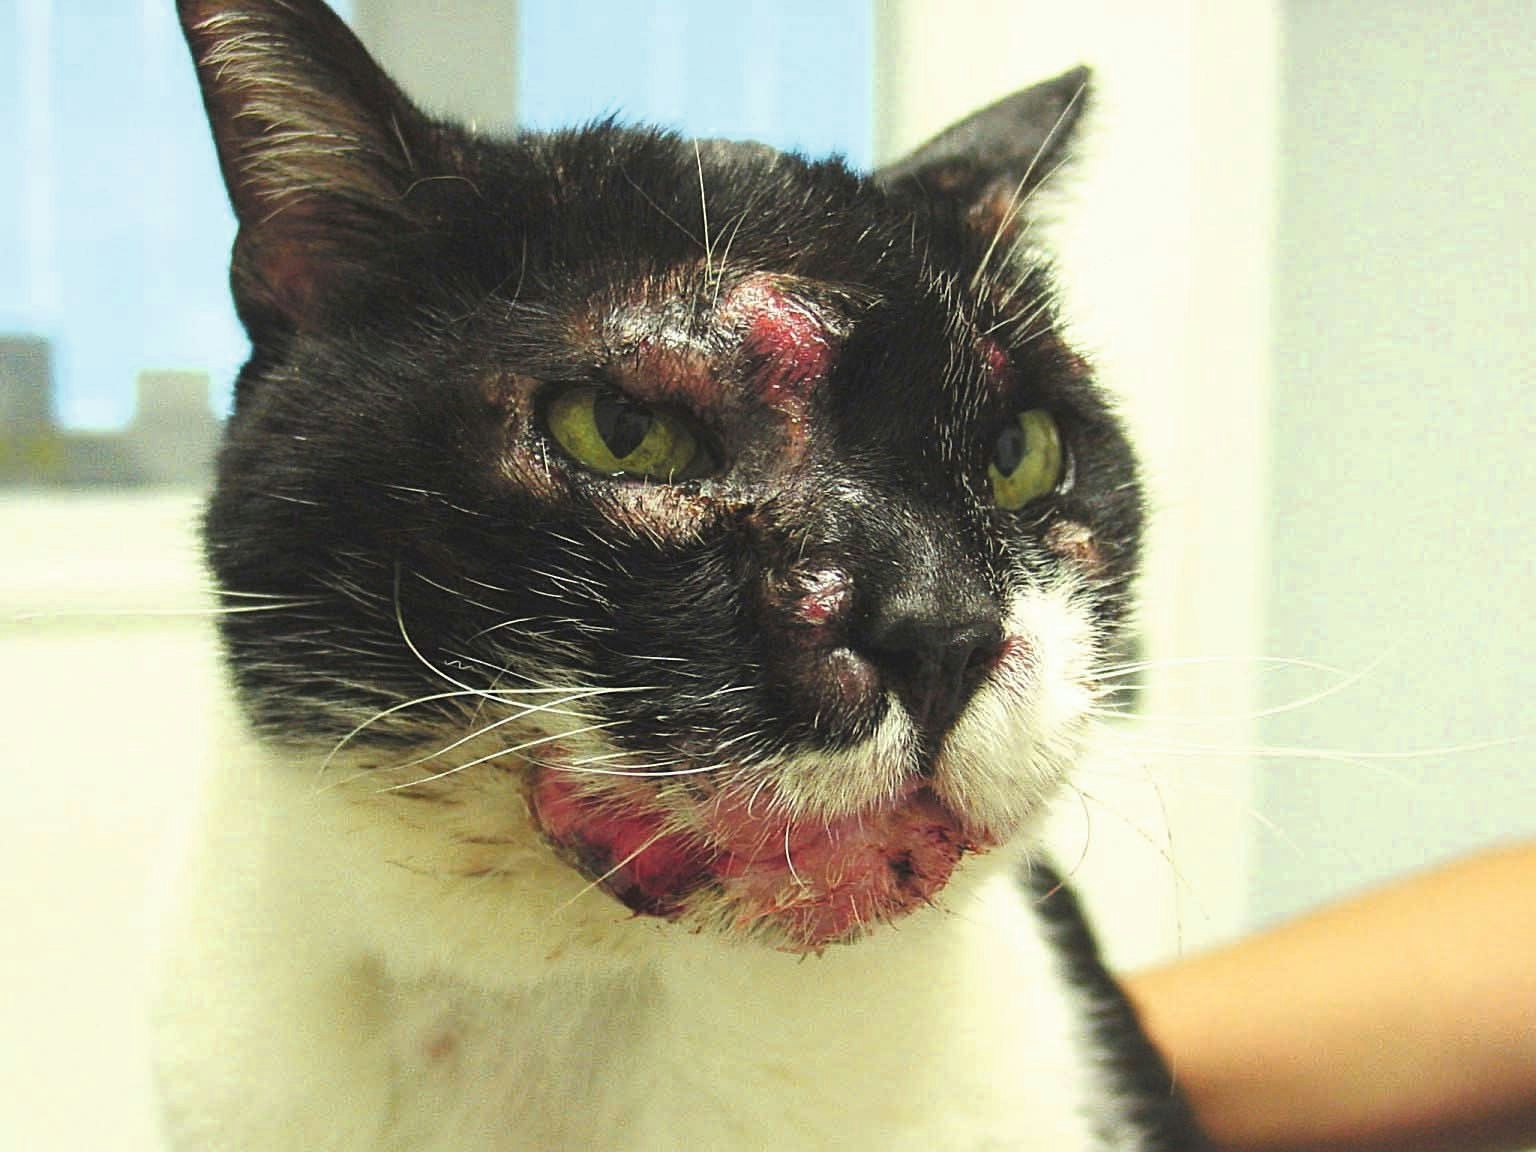 CNEL in a cat with facial distribution of multiple adjacent to coalescing plaques and nodules. The skin is partially alopecic, eroded and ulcerated, especially over the right eye and mandibular lip fold.